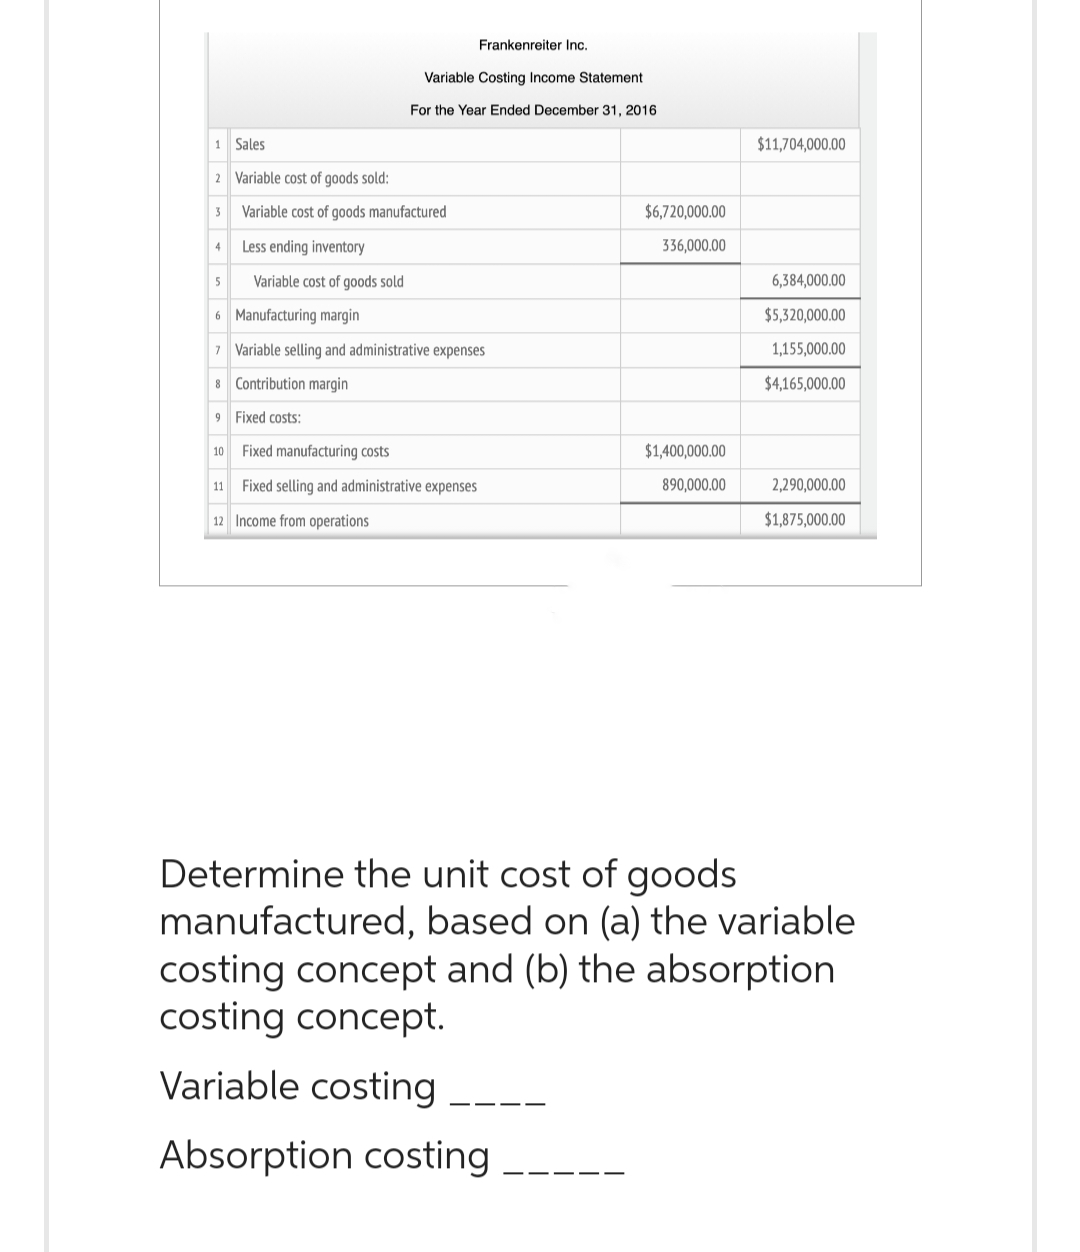 1 Sales
2 Variable cost of goods sold:
3
4
5
9
10
11
Variable cost of goods manufactured
Less ending inventory
Variable cost of goods sold
6 Manufacturing margin
7 Variable selling and administrative expenses
8
Contribution margin
Variable Costing Income Statement
For the Year Ended December 31, 2016
Frankenreiter Inc.
Fixed costs:
Fixed manufacturing costs
Fixed selling and administrative expenses
12 Income from operations
$6,720,000.00
336,000.00
$1,400,000.00
890,000.00
$11,704,000.00
6,384,000.00
$5,320,000.00
1,155,000.00
$4,165,000.00
2,290,000.00
$1,875,000.00
Determine the unit cost of goods
manufactured, based on (a) the variable
costing concept and (b) the absorption
costing concept.
Variable costing
Absorption costing